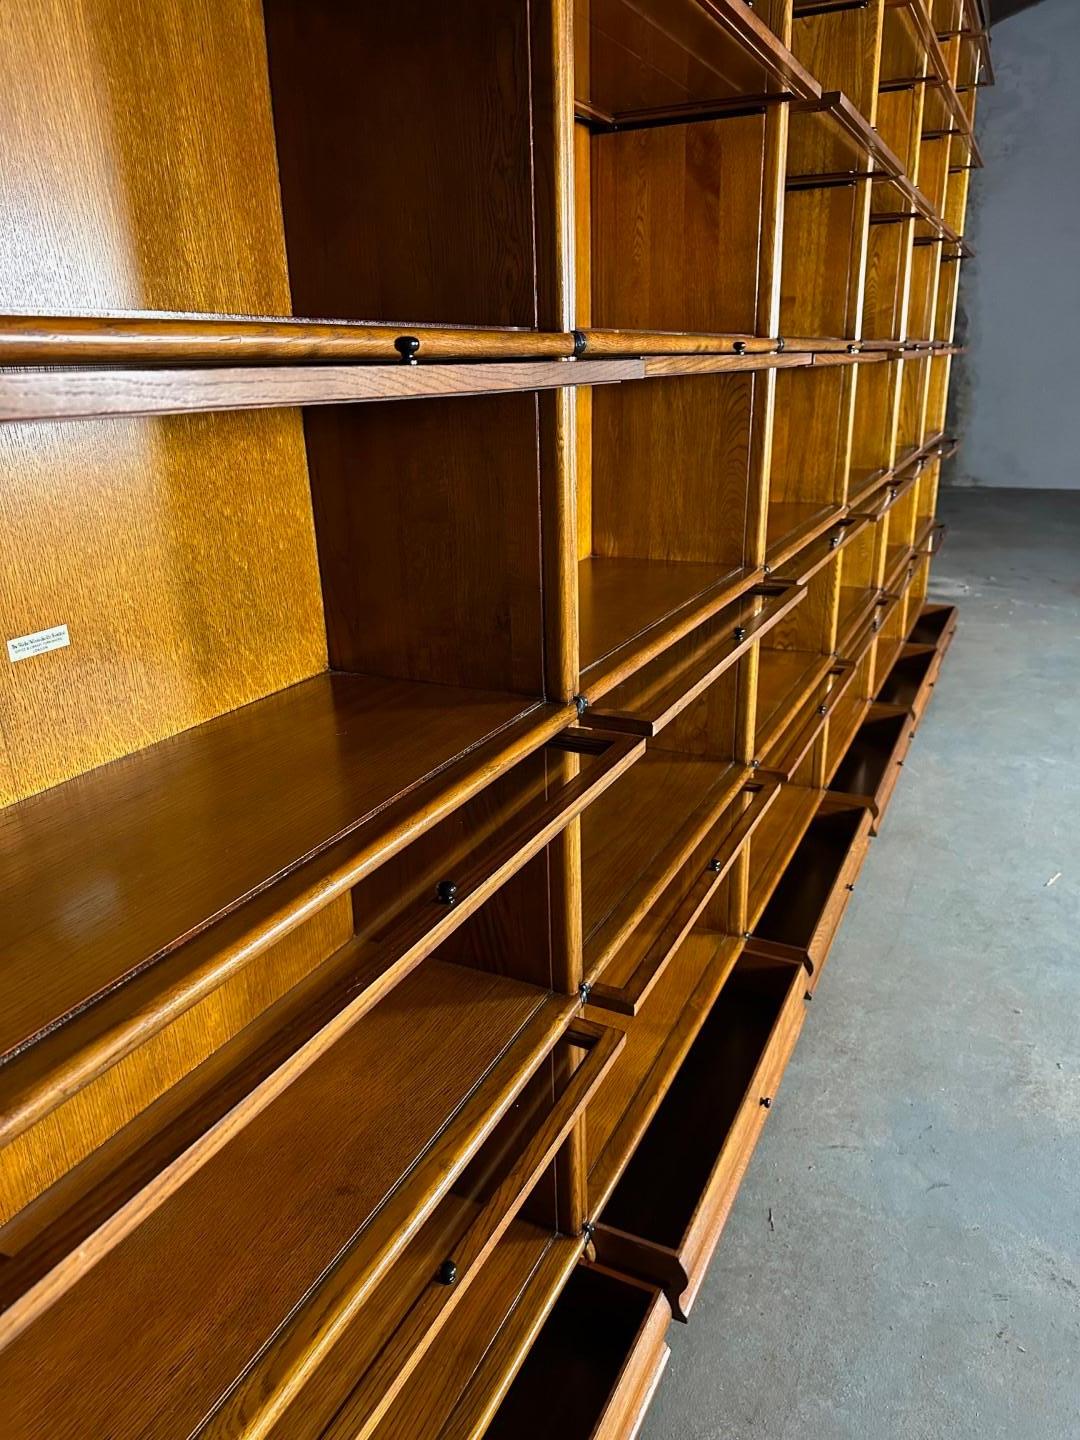 Large solid oak Globe Wernicke bookcase consisting of 36 stackable parts.  
Bottoms and back are from plywood like all Globe Wernicke Bookcases
Drawers in the base. Completely in perfect condition.


Size: 516cm x 35cm x h.250cm

